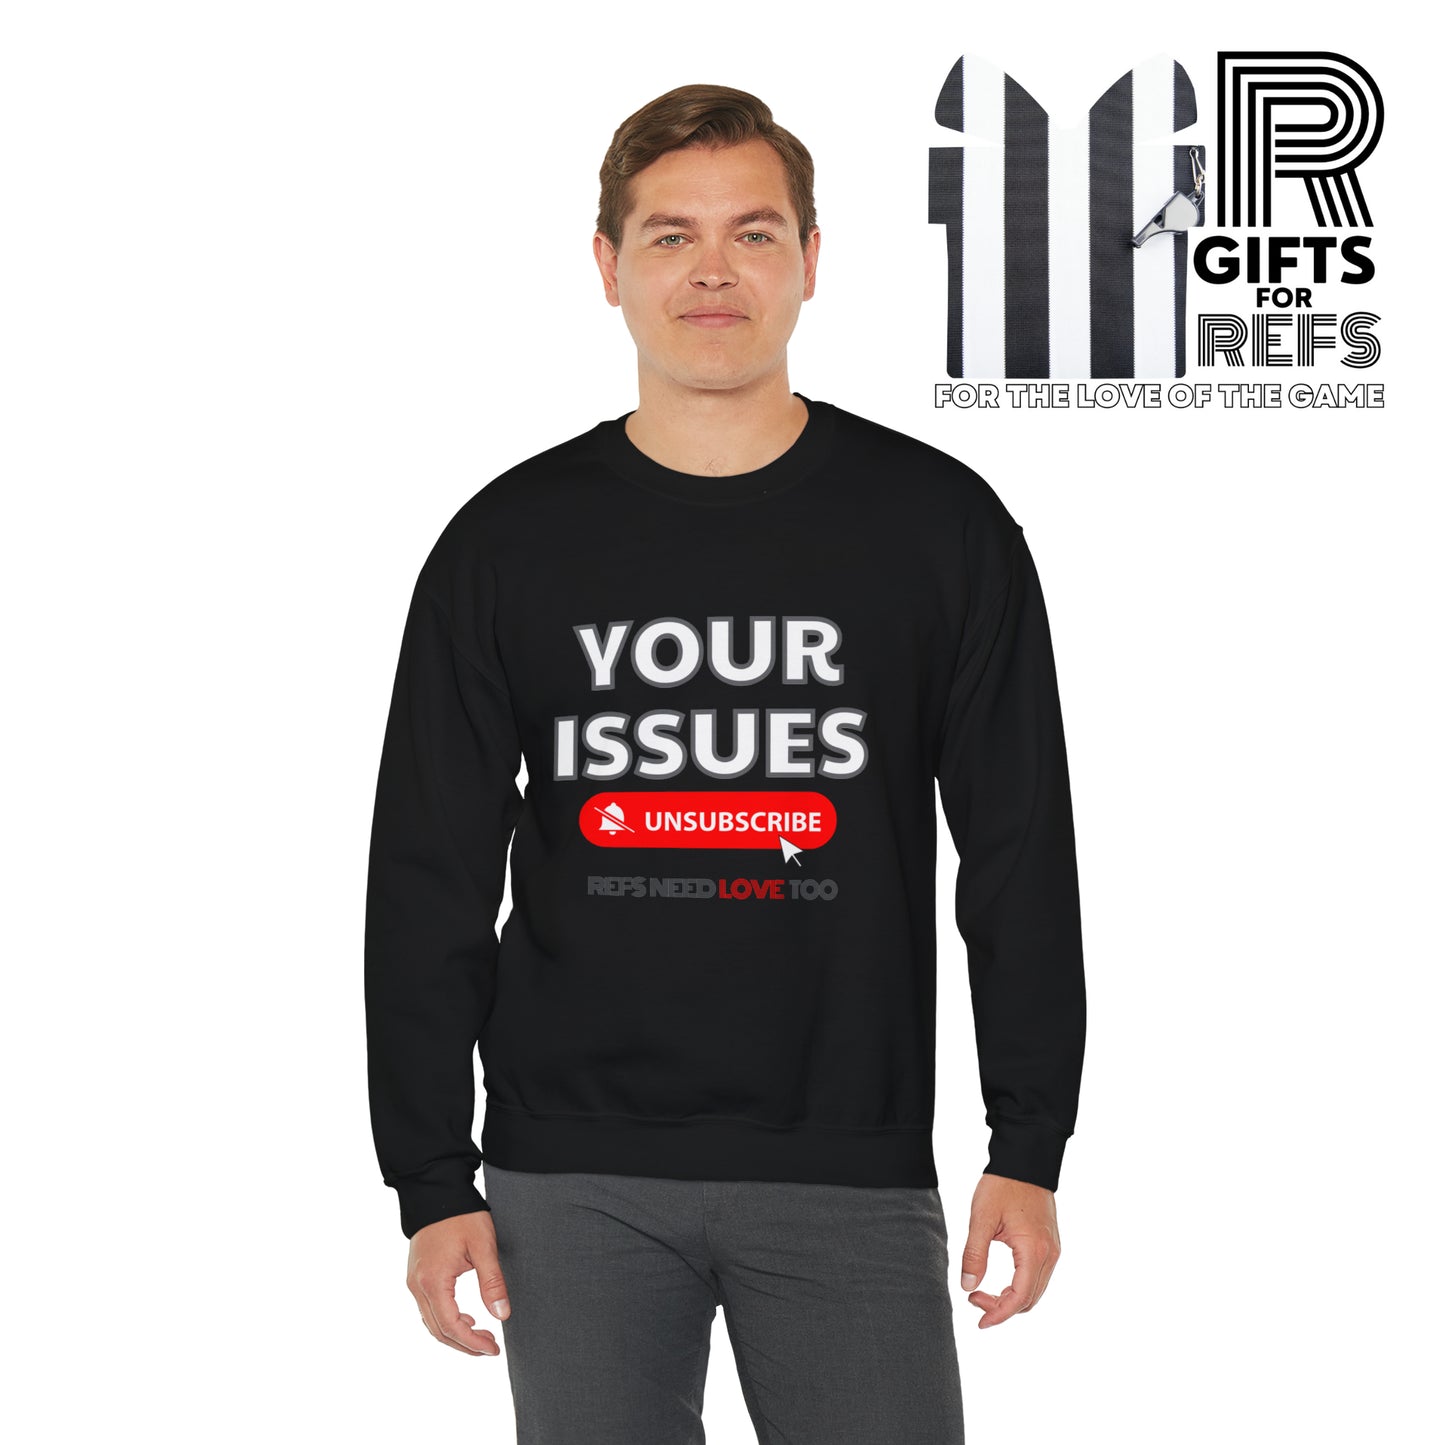 Unsubscribe to Your Issues Unisex Heavy Crewneck Sweatshirt | Gifts For Referees | For Sports officials